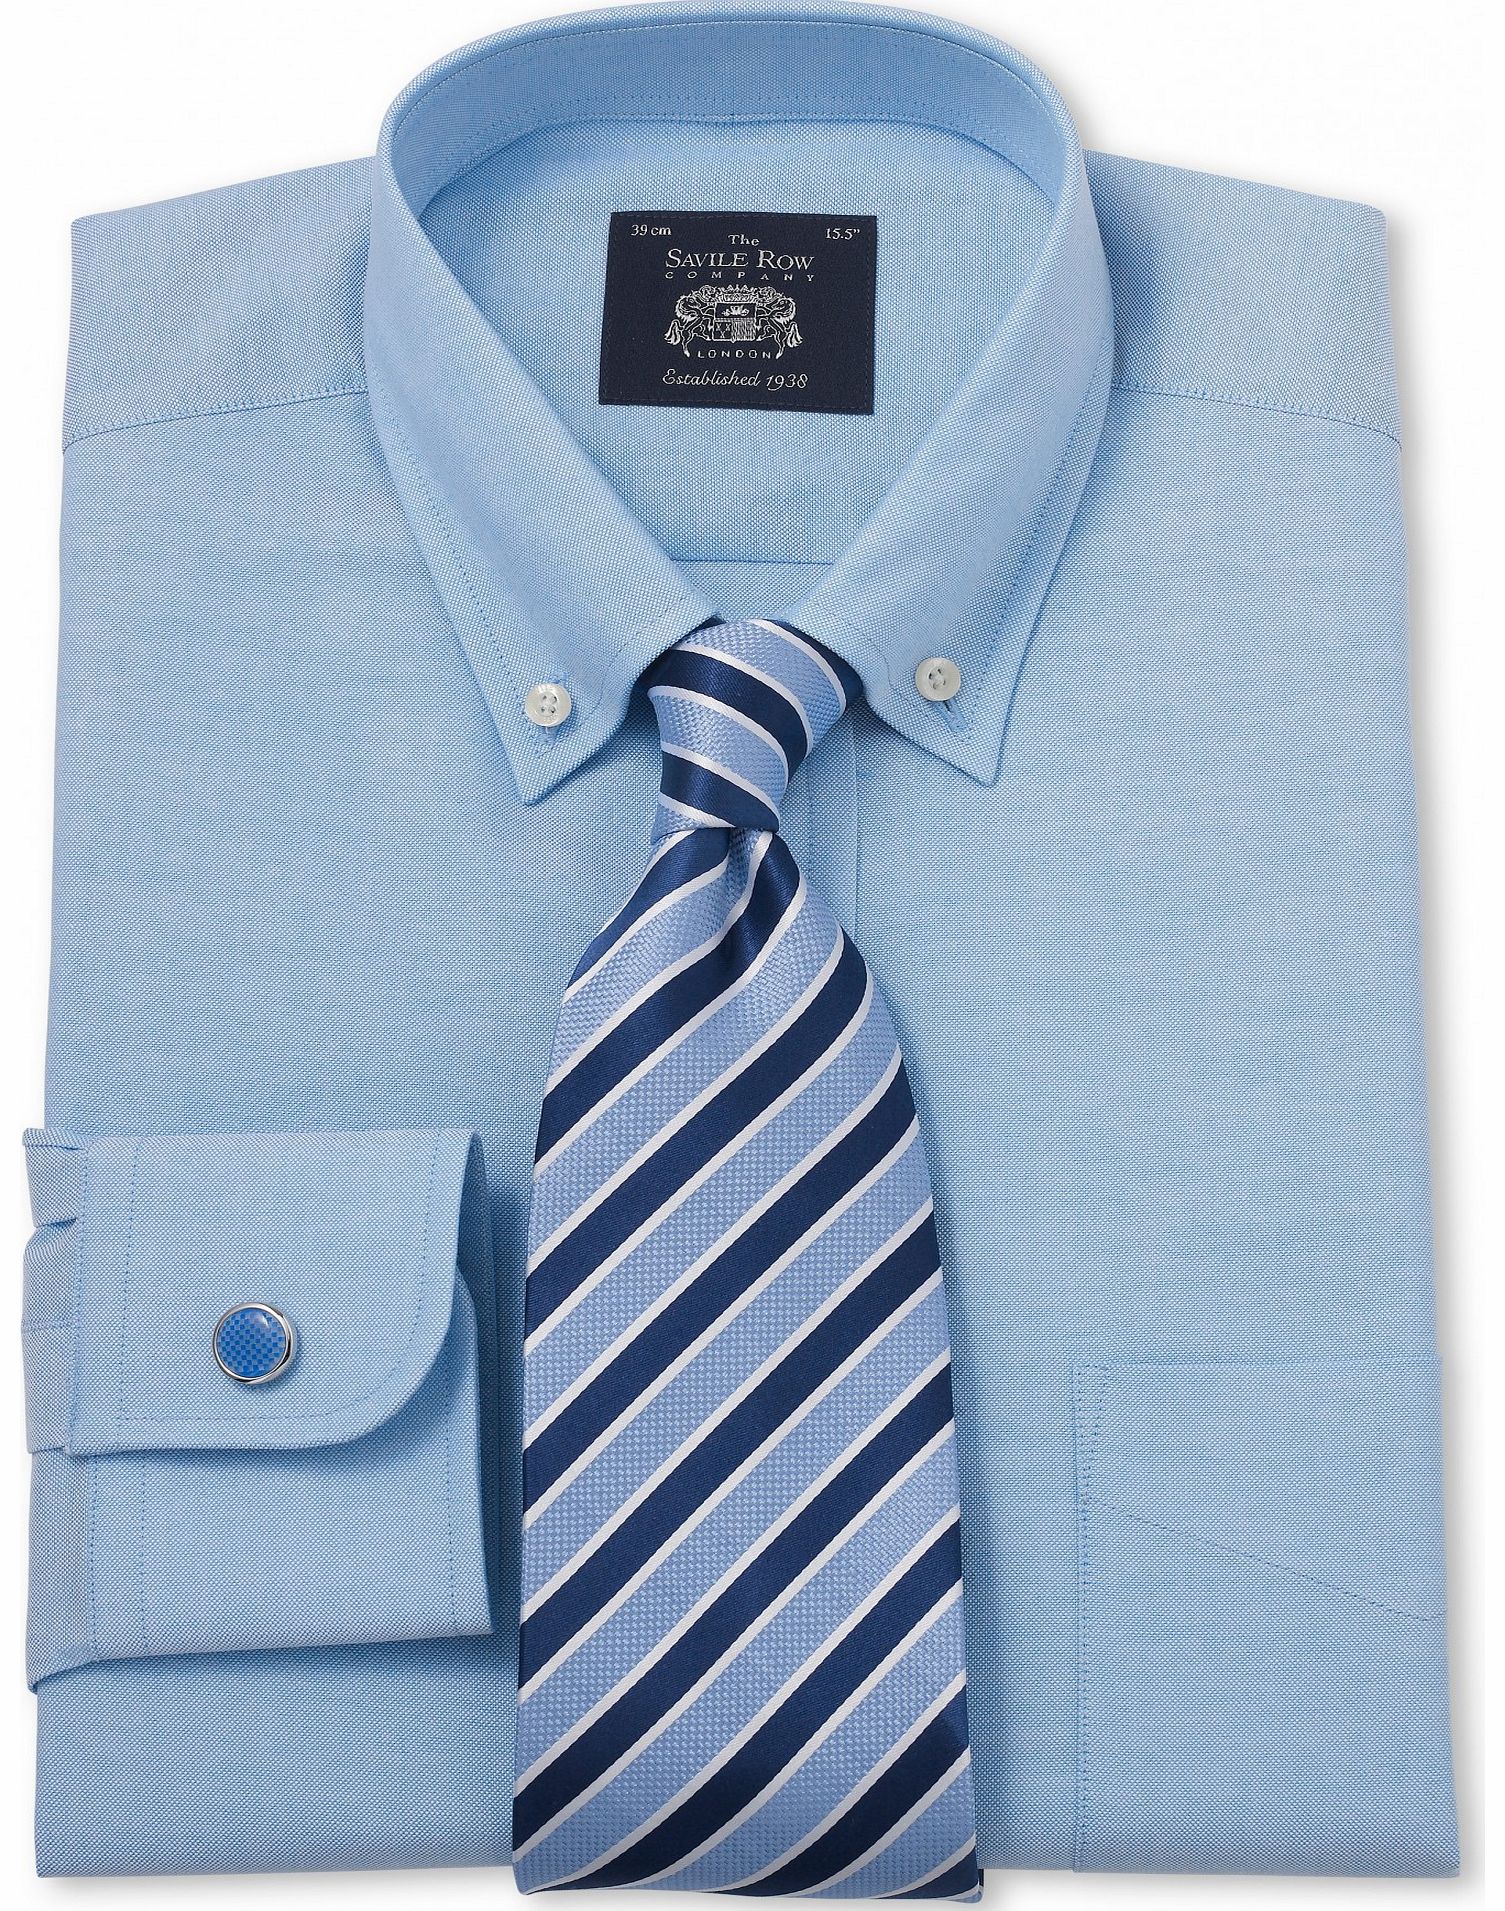 Savile Row Company Blue Pinpoint Classic Fit Shirt 18`` Lengthened